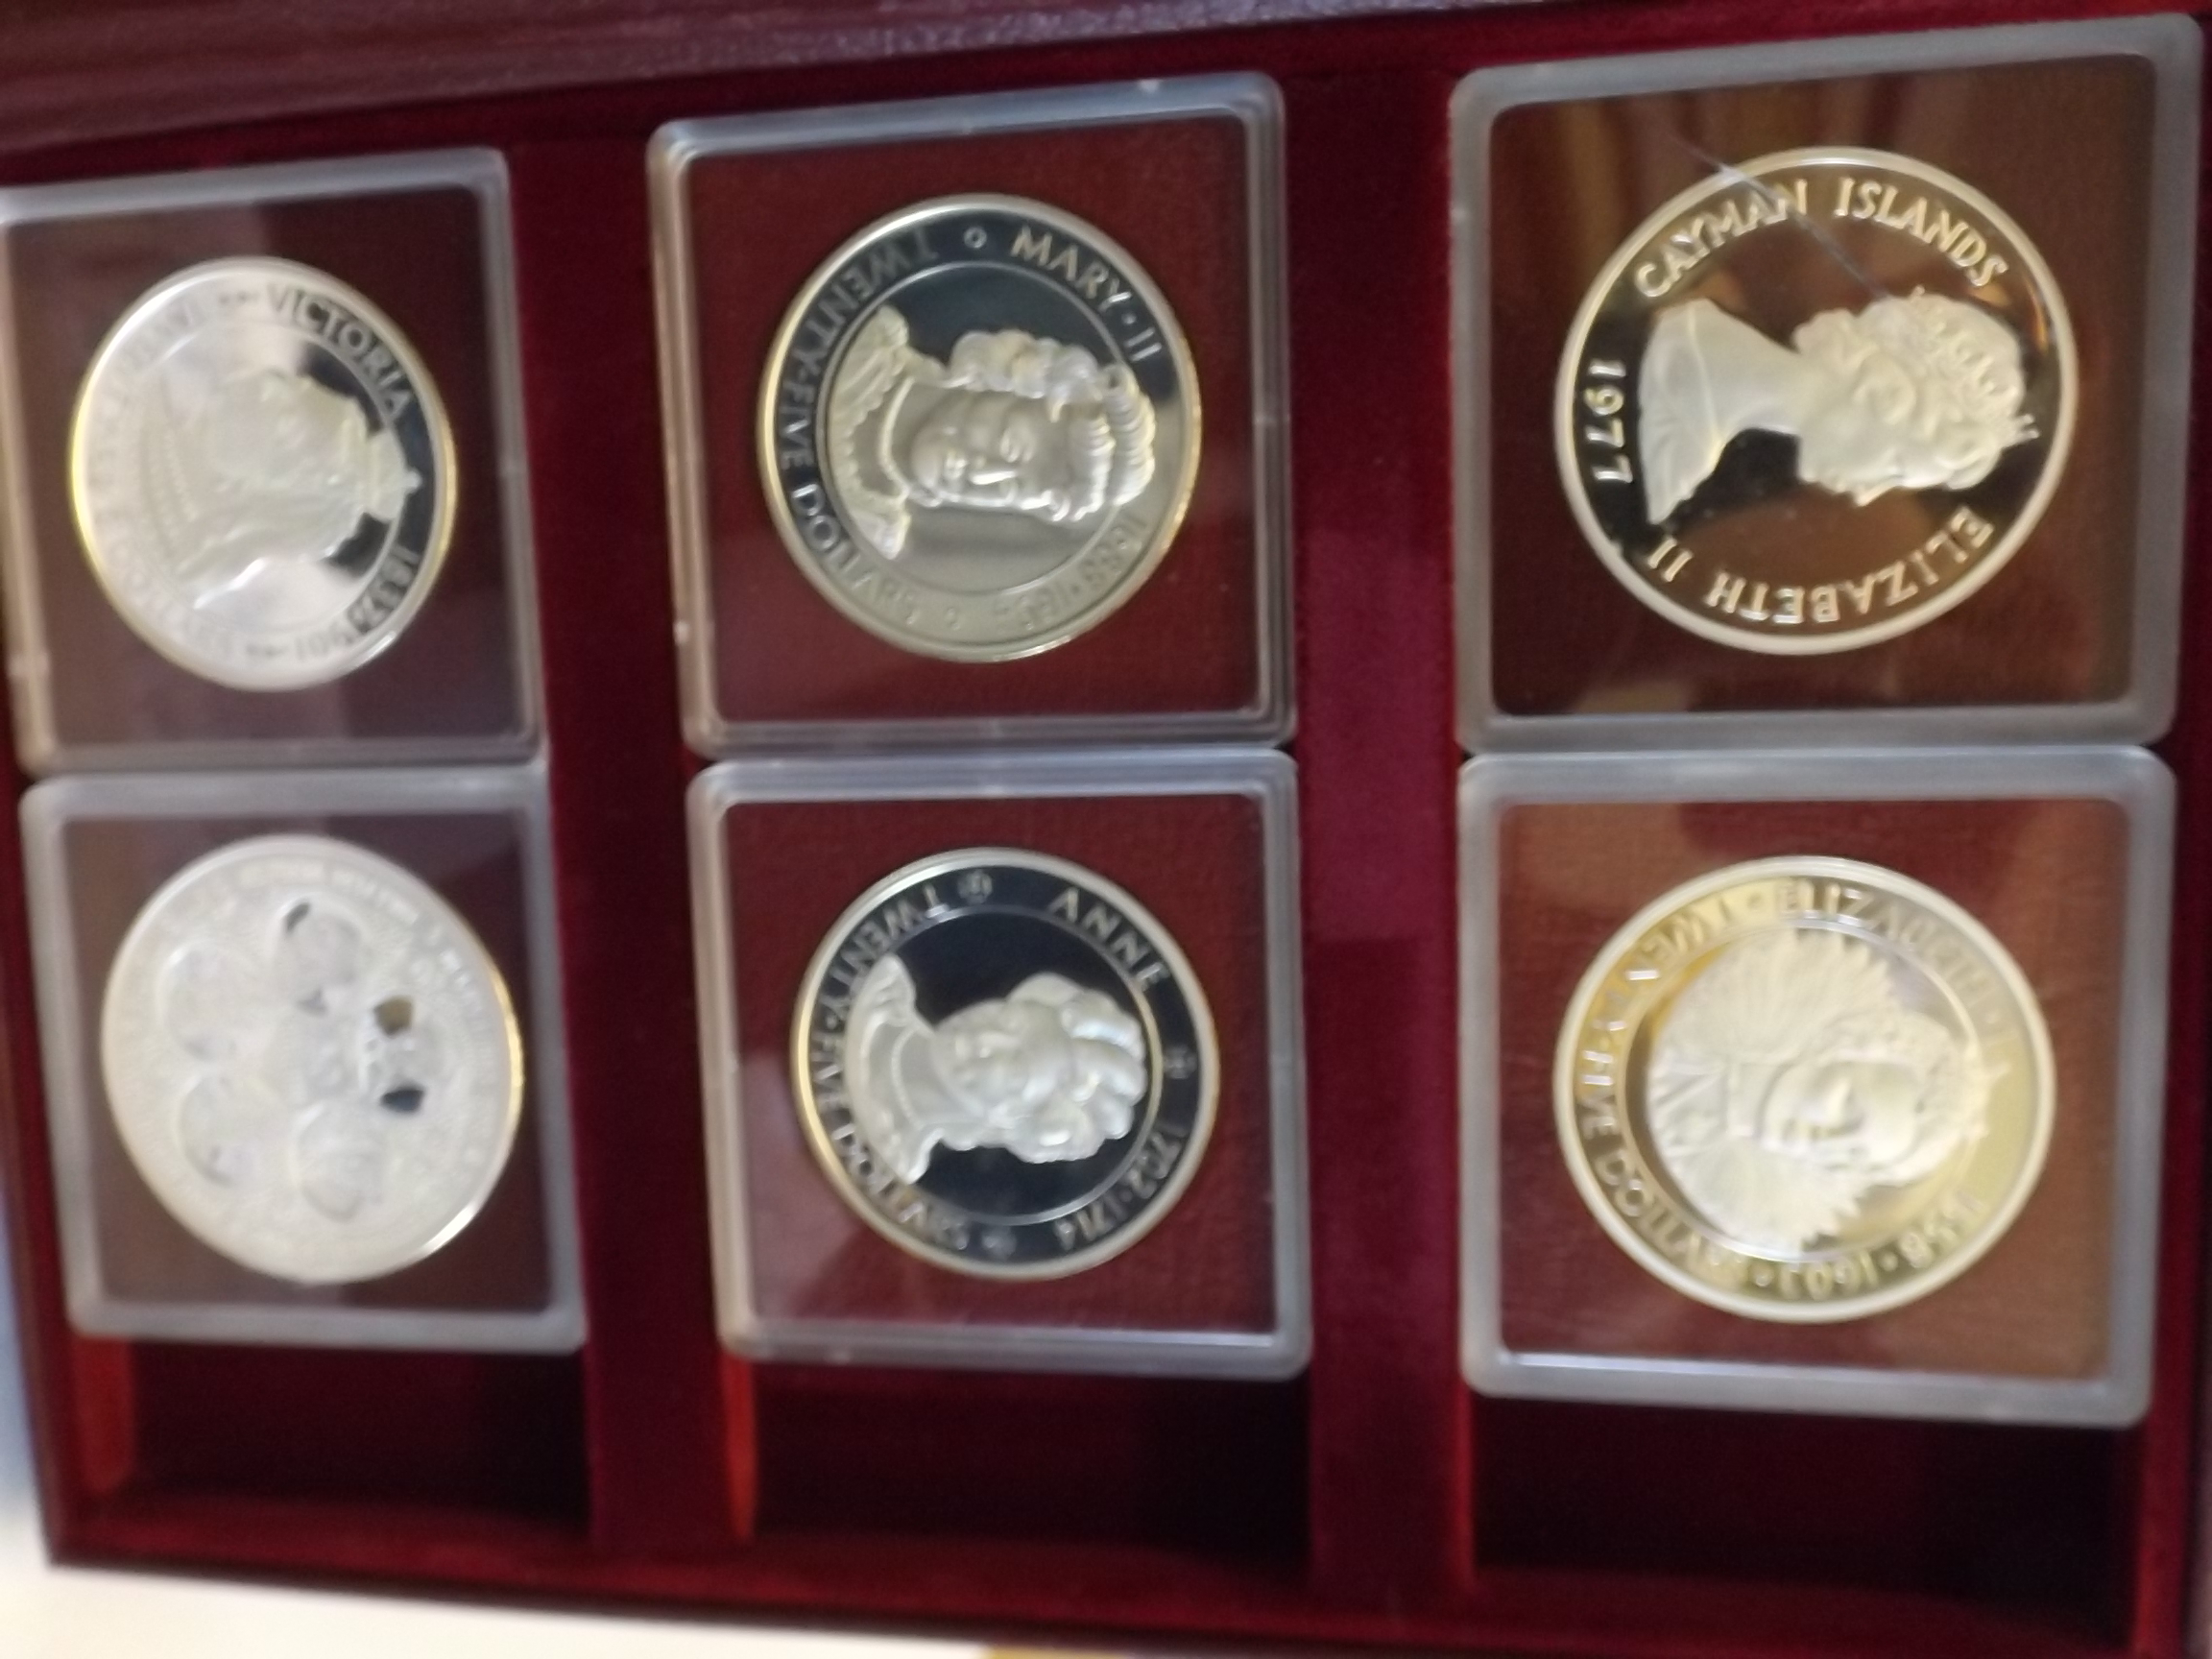 The Cayman Islands silver queens collection 1977, a cased set of 6 sterling silver coins.